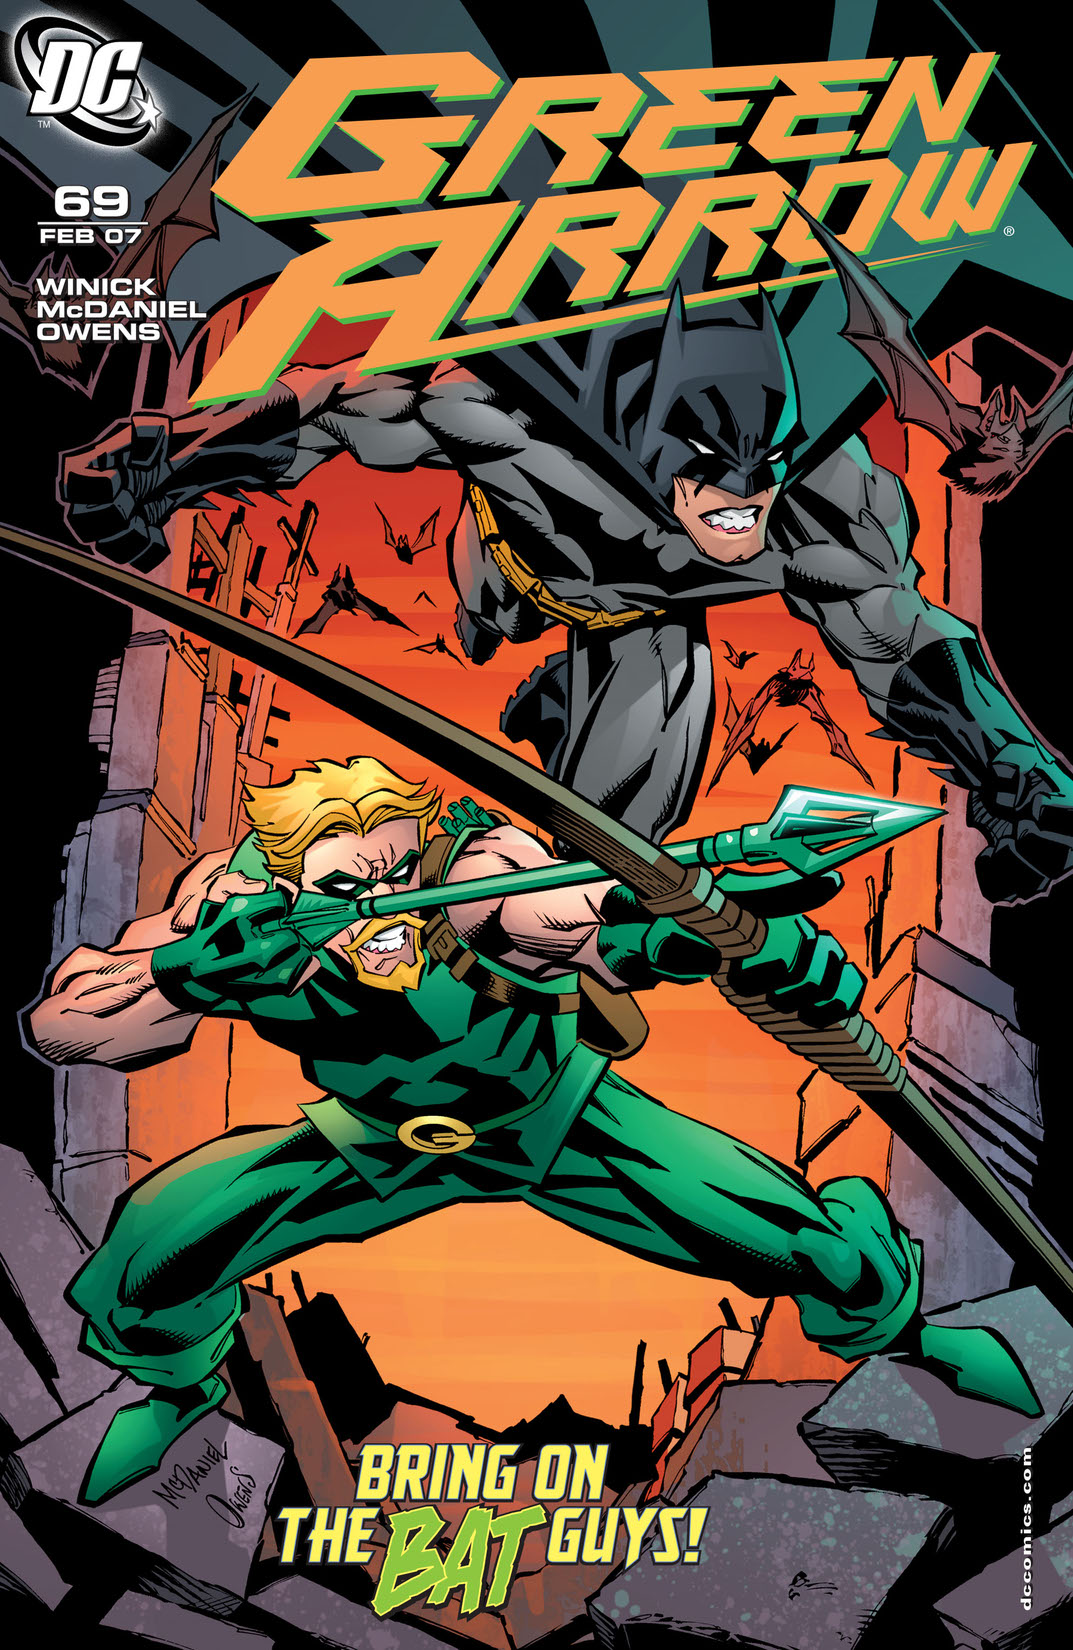 Green Arrow (2001-) #69 preview images